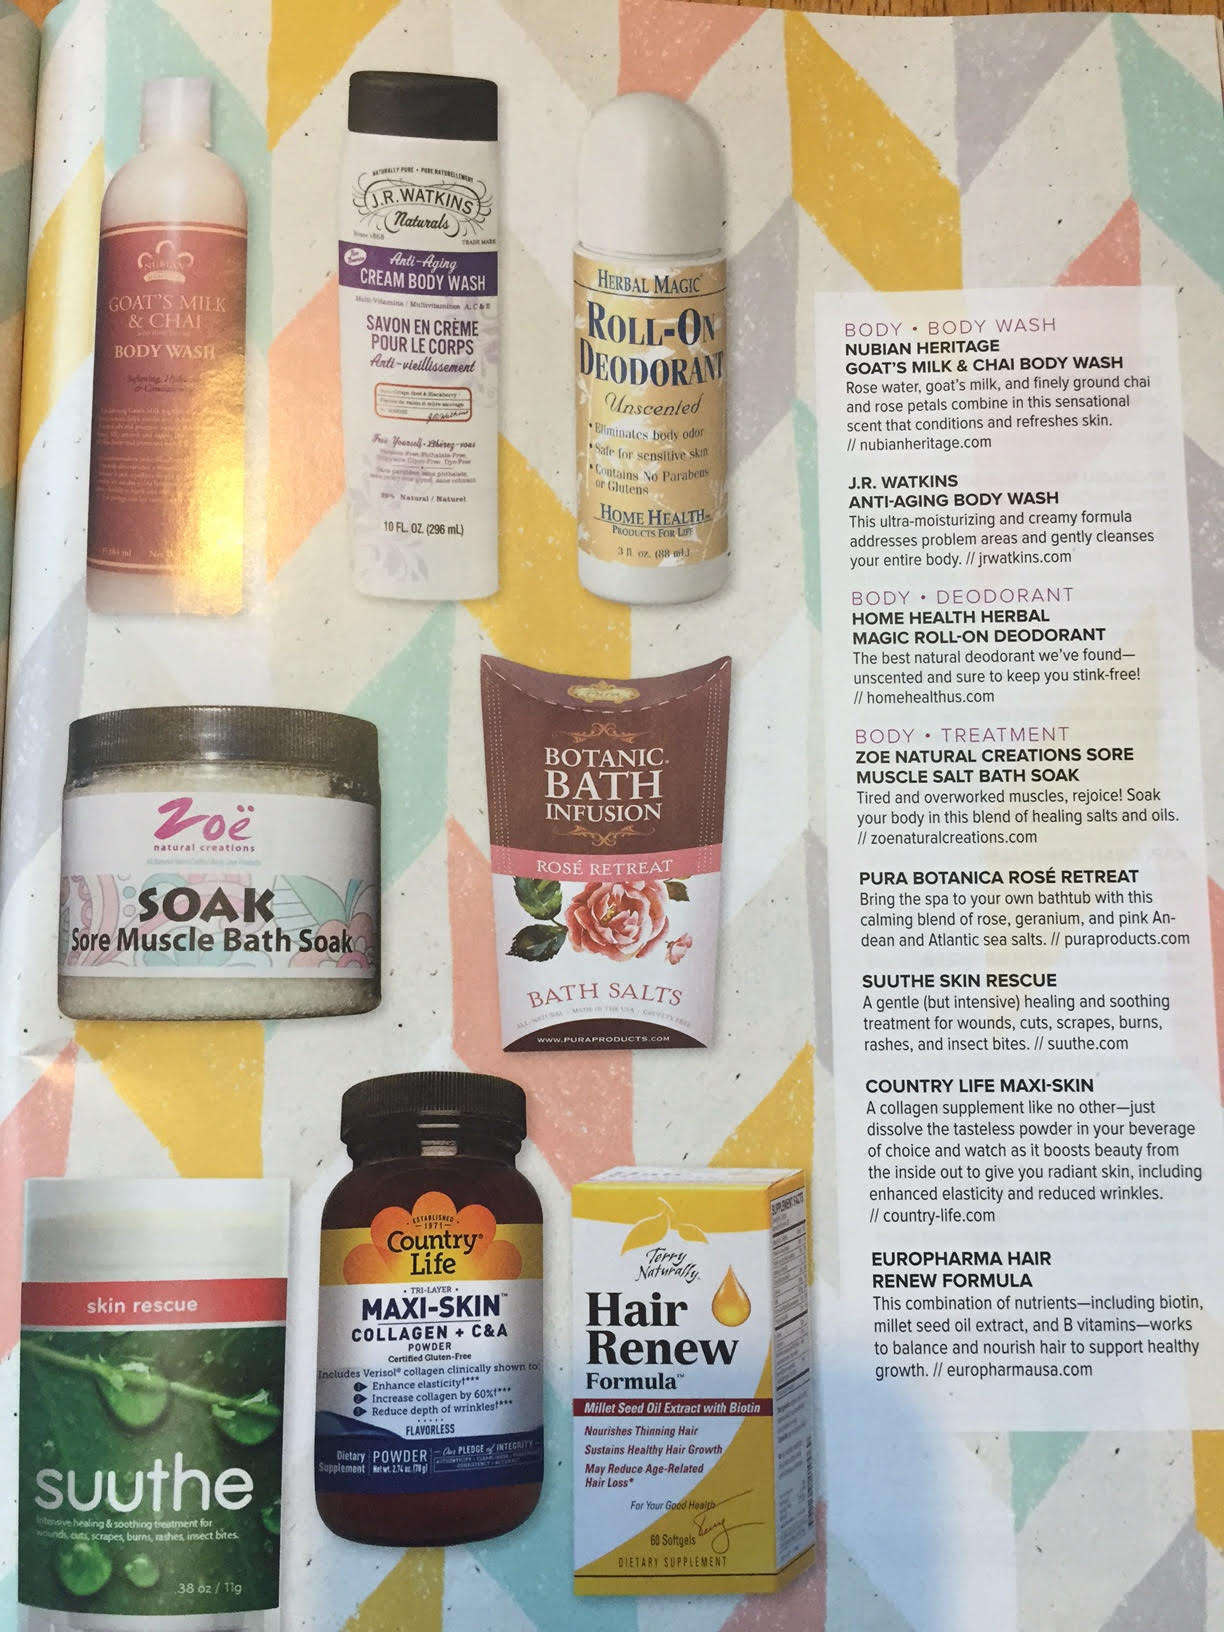 Beauty with a Conscience Award from Natural Solutions Magazine